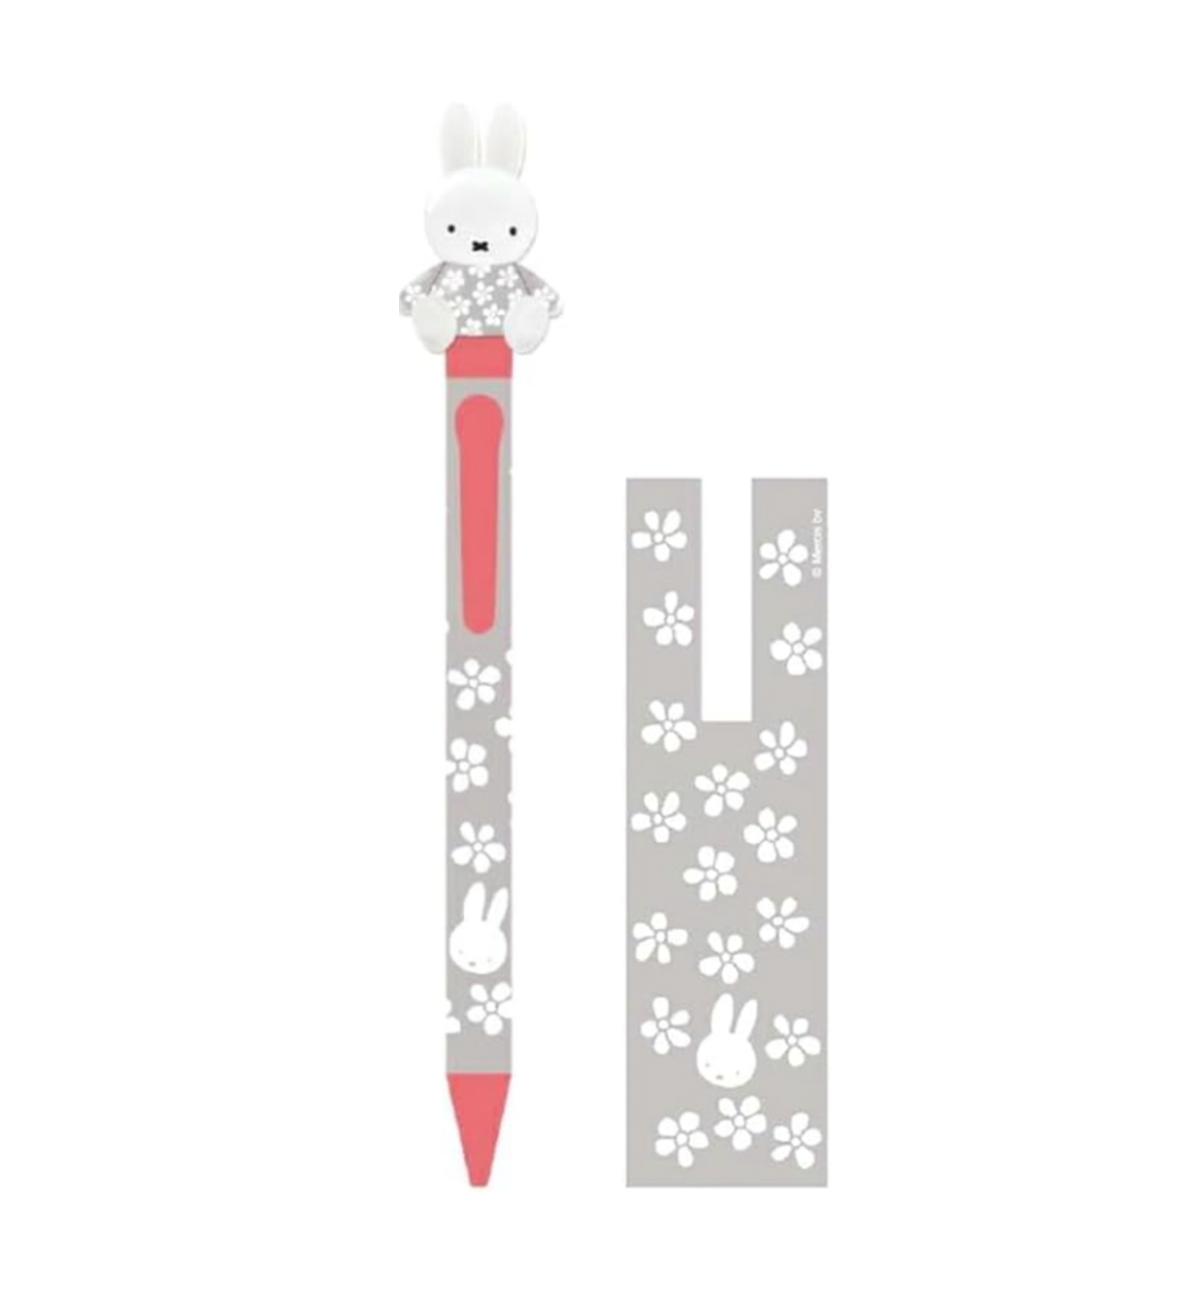 Miffy Action 0.7mm Pen [Gray]